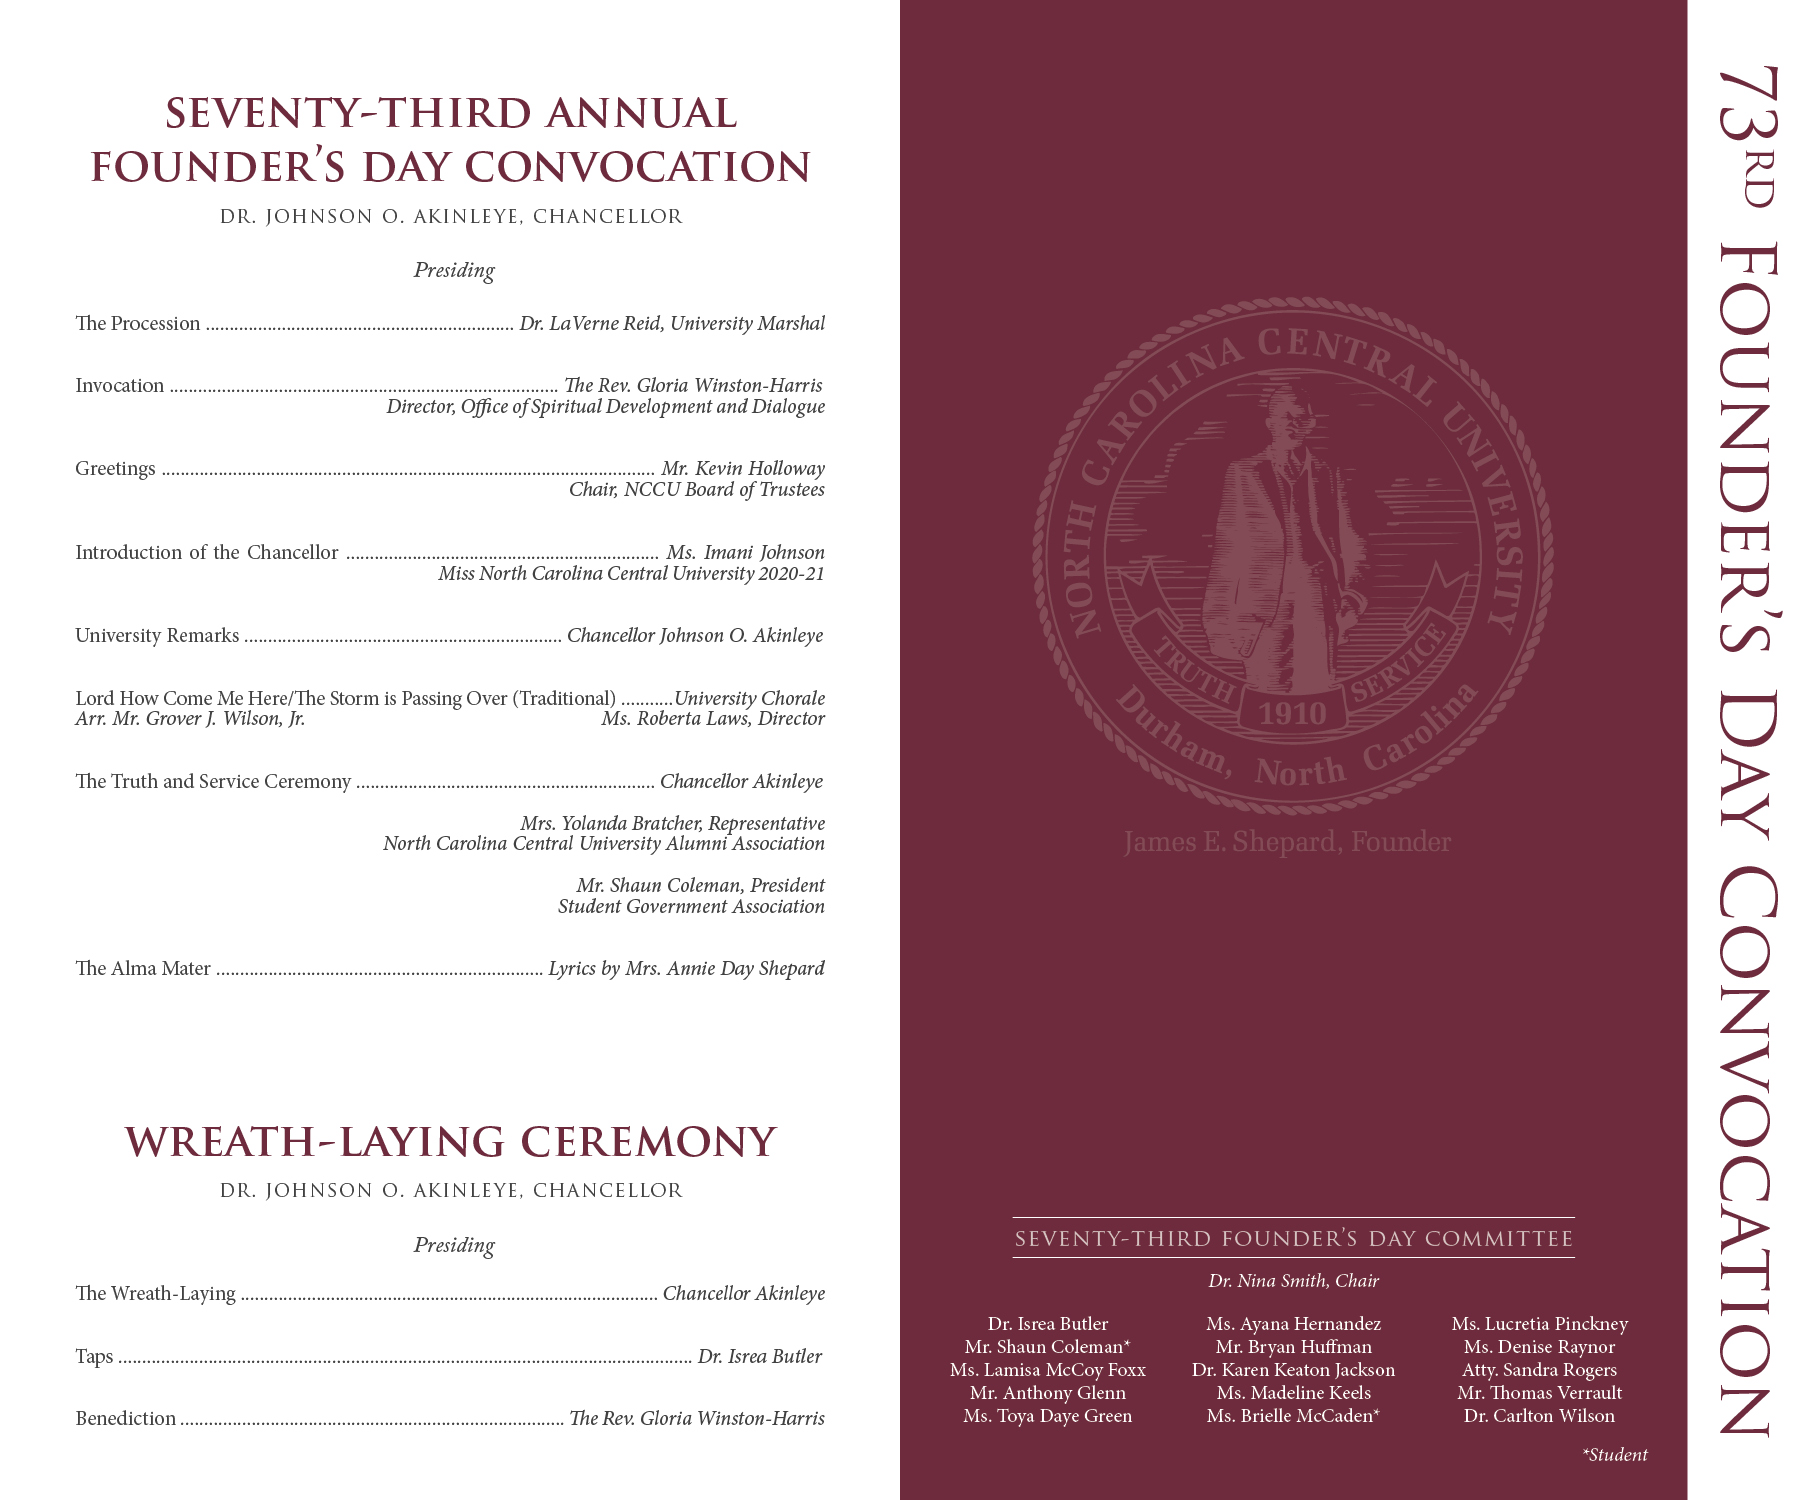 73rd Founder's Day Convocation Program